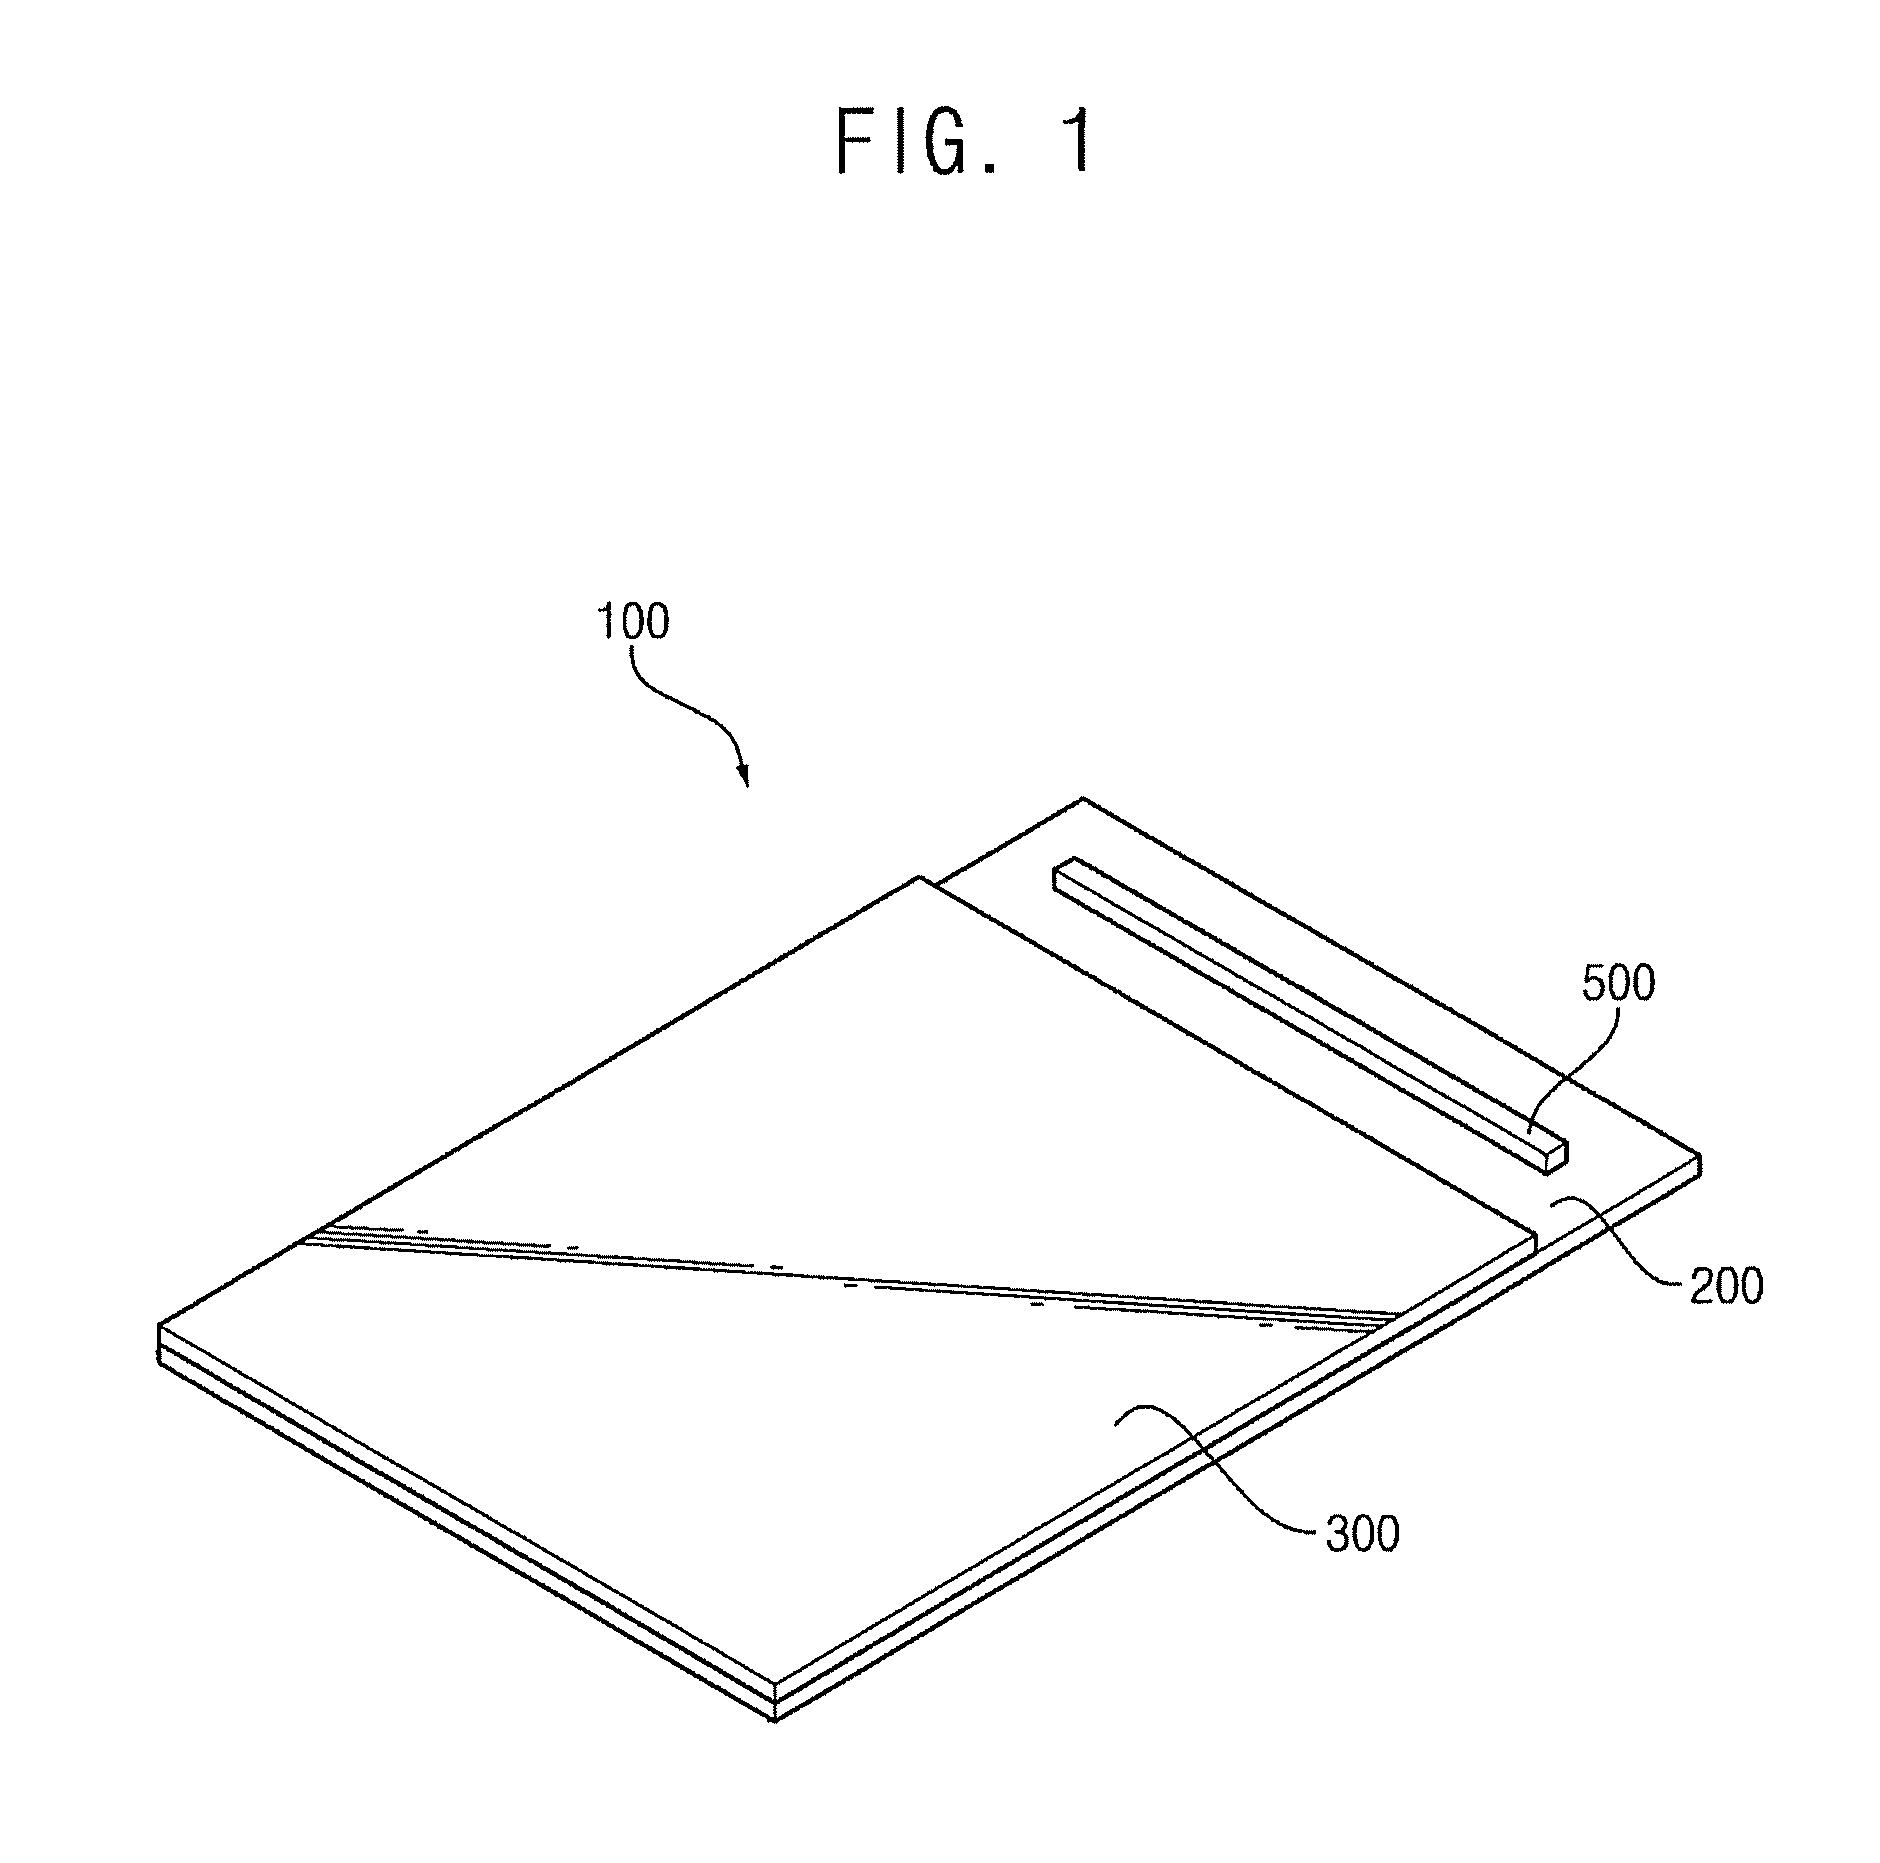 Display apparatus including first and second signal lines connected to data lines on respectively opposite sides of a gate insulating layer within the seal line of the peripheral area and arranged for curing the seal line